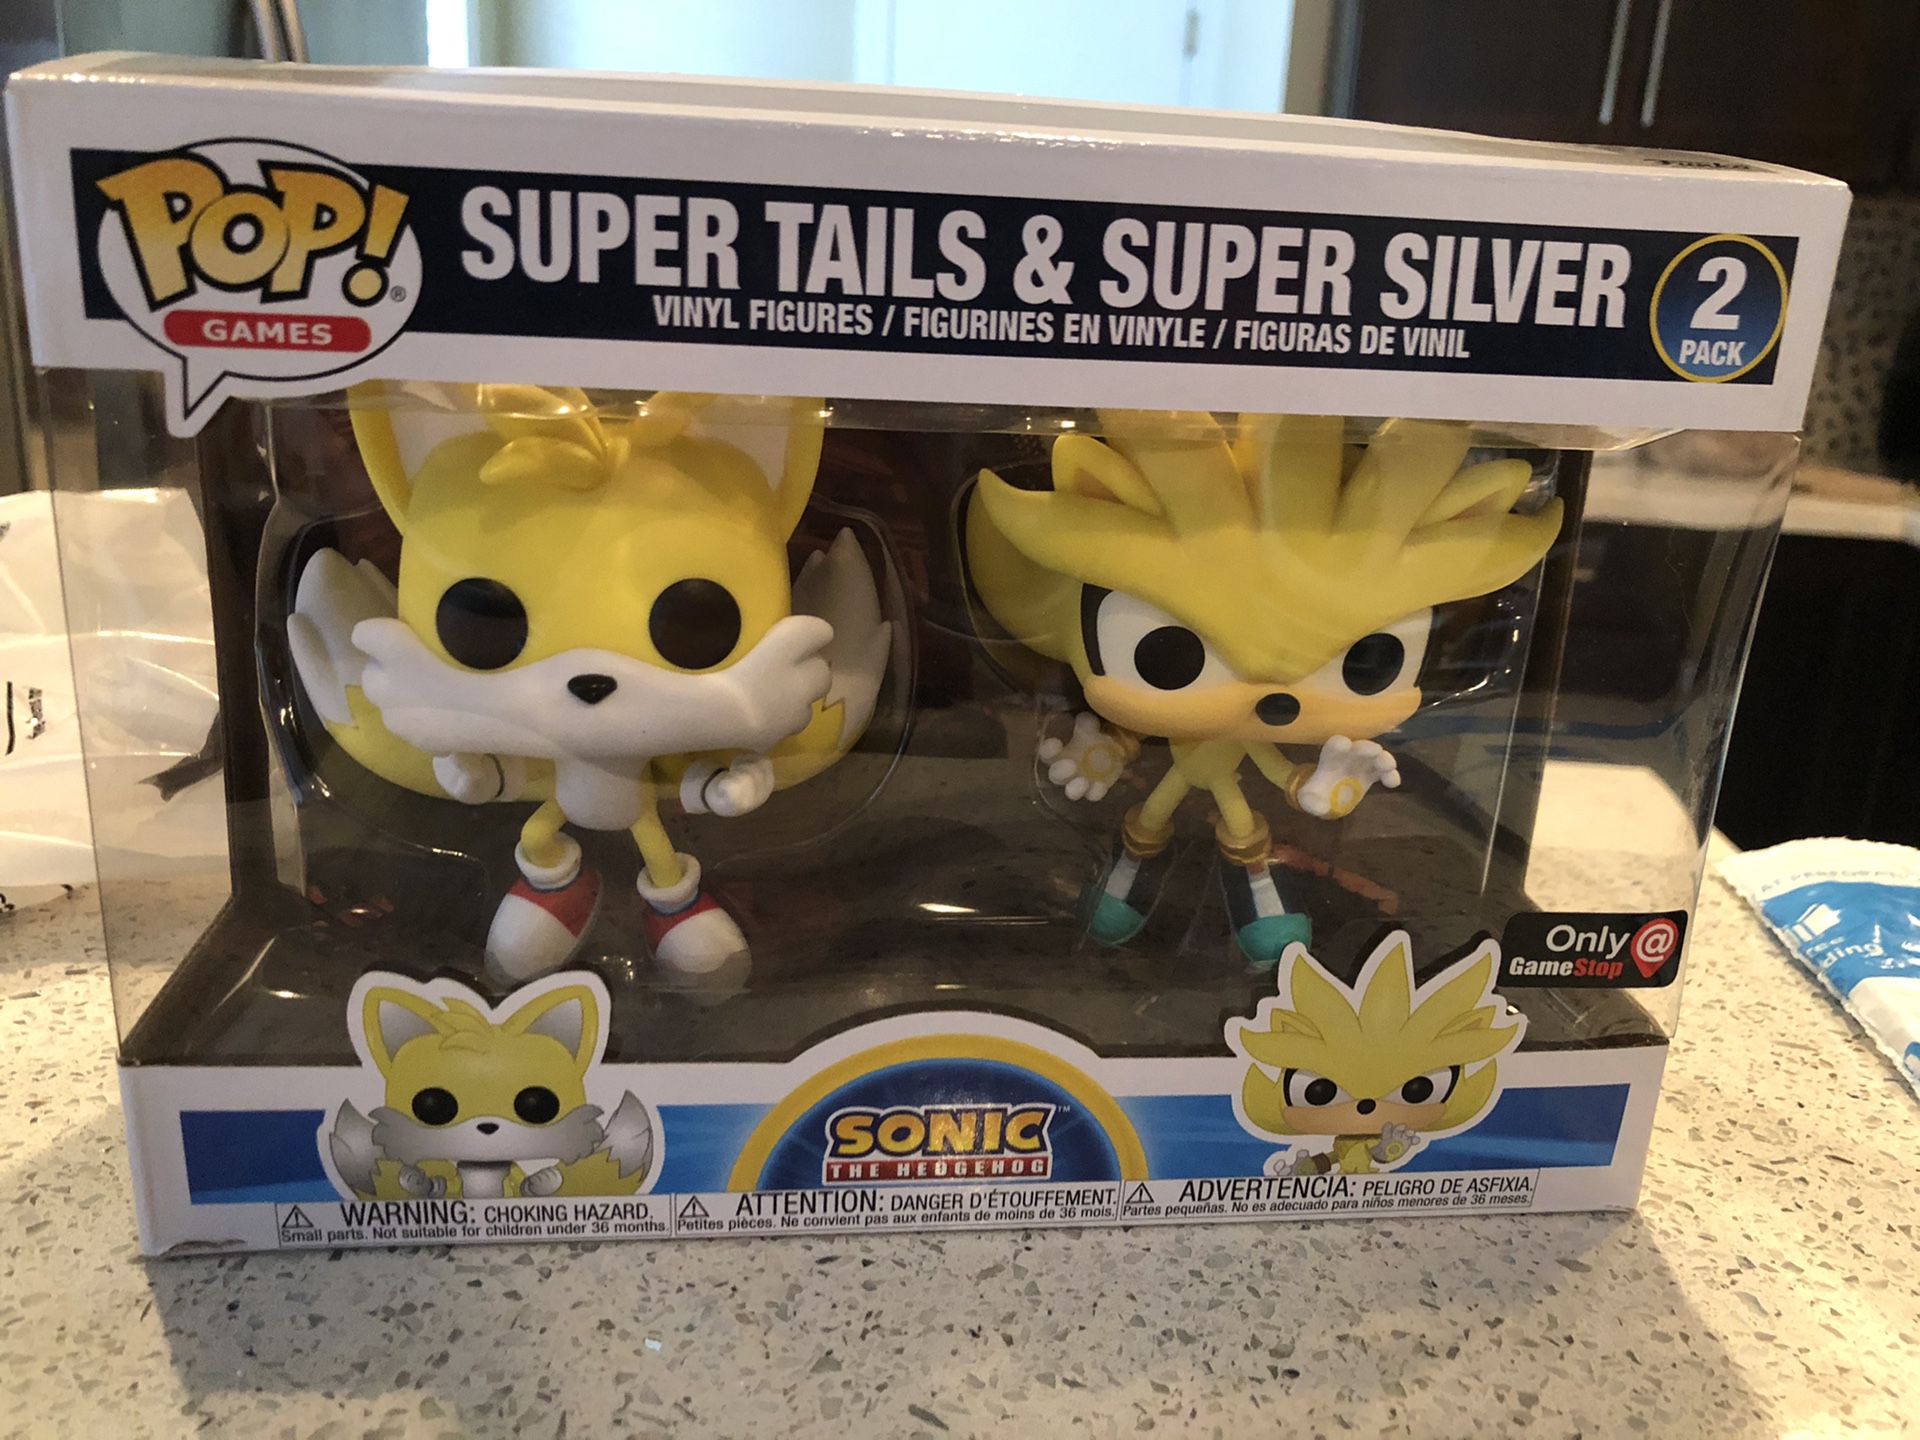 Pop! Games: Sonic Super Tails and Super Silver Exclusive Two-Pack